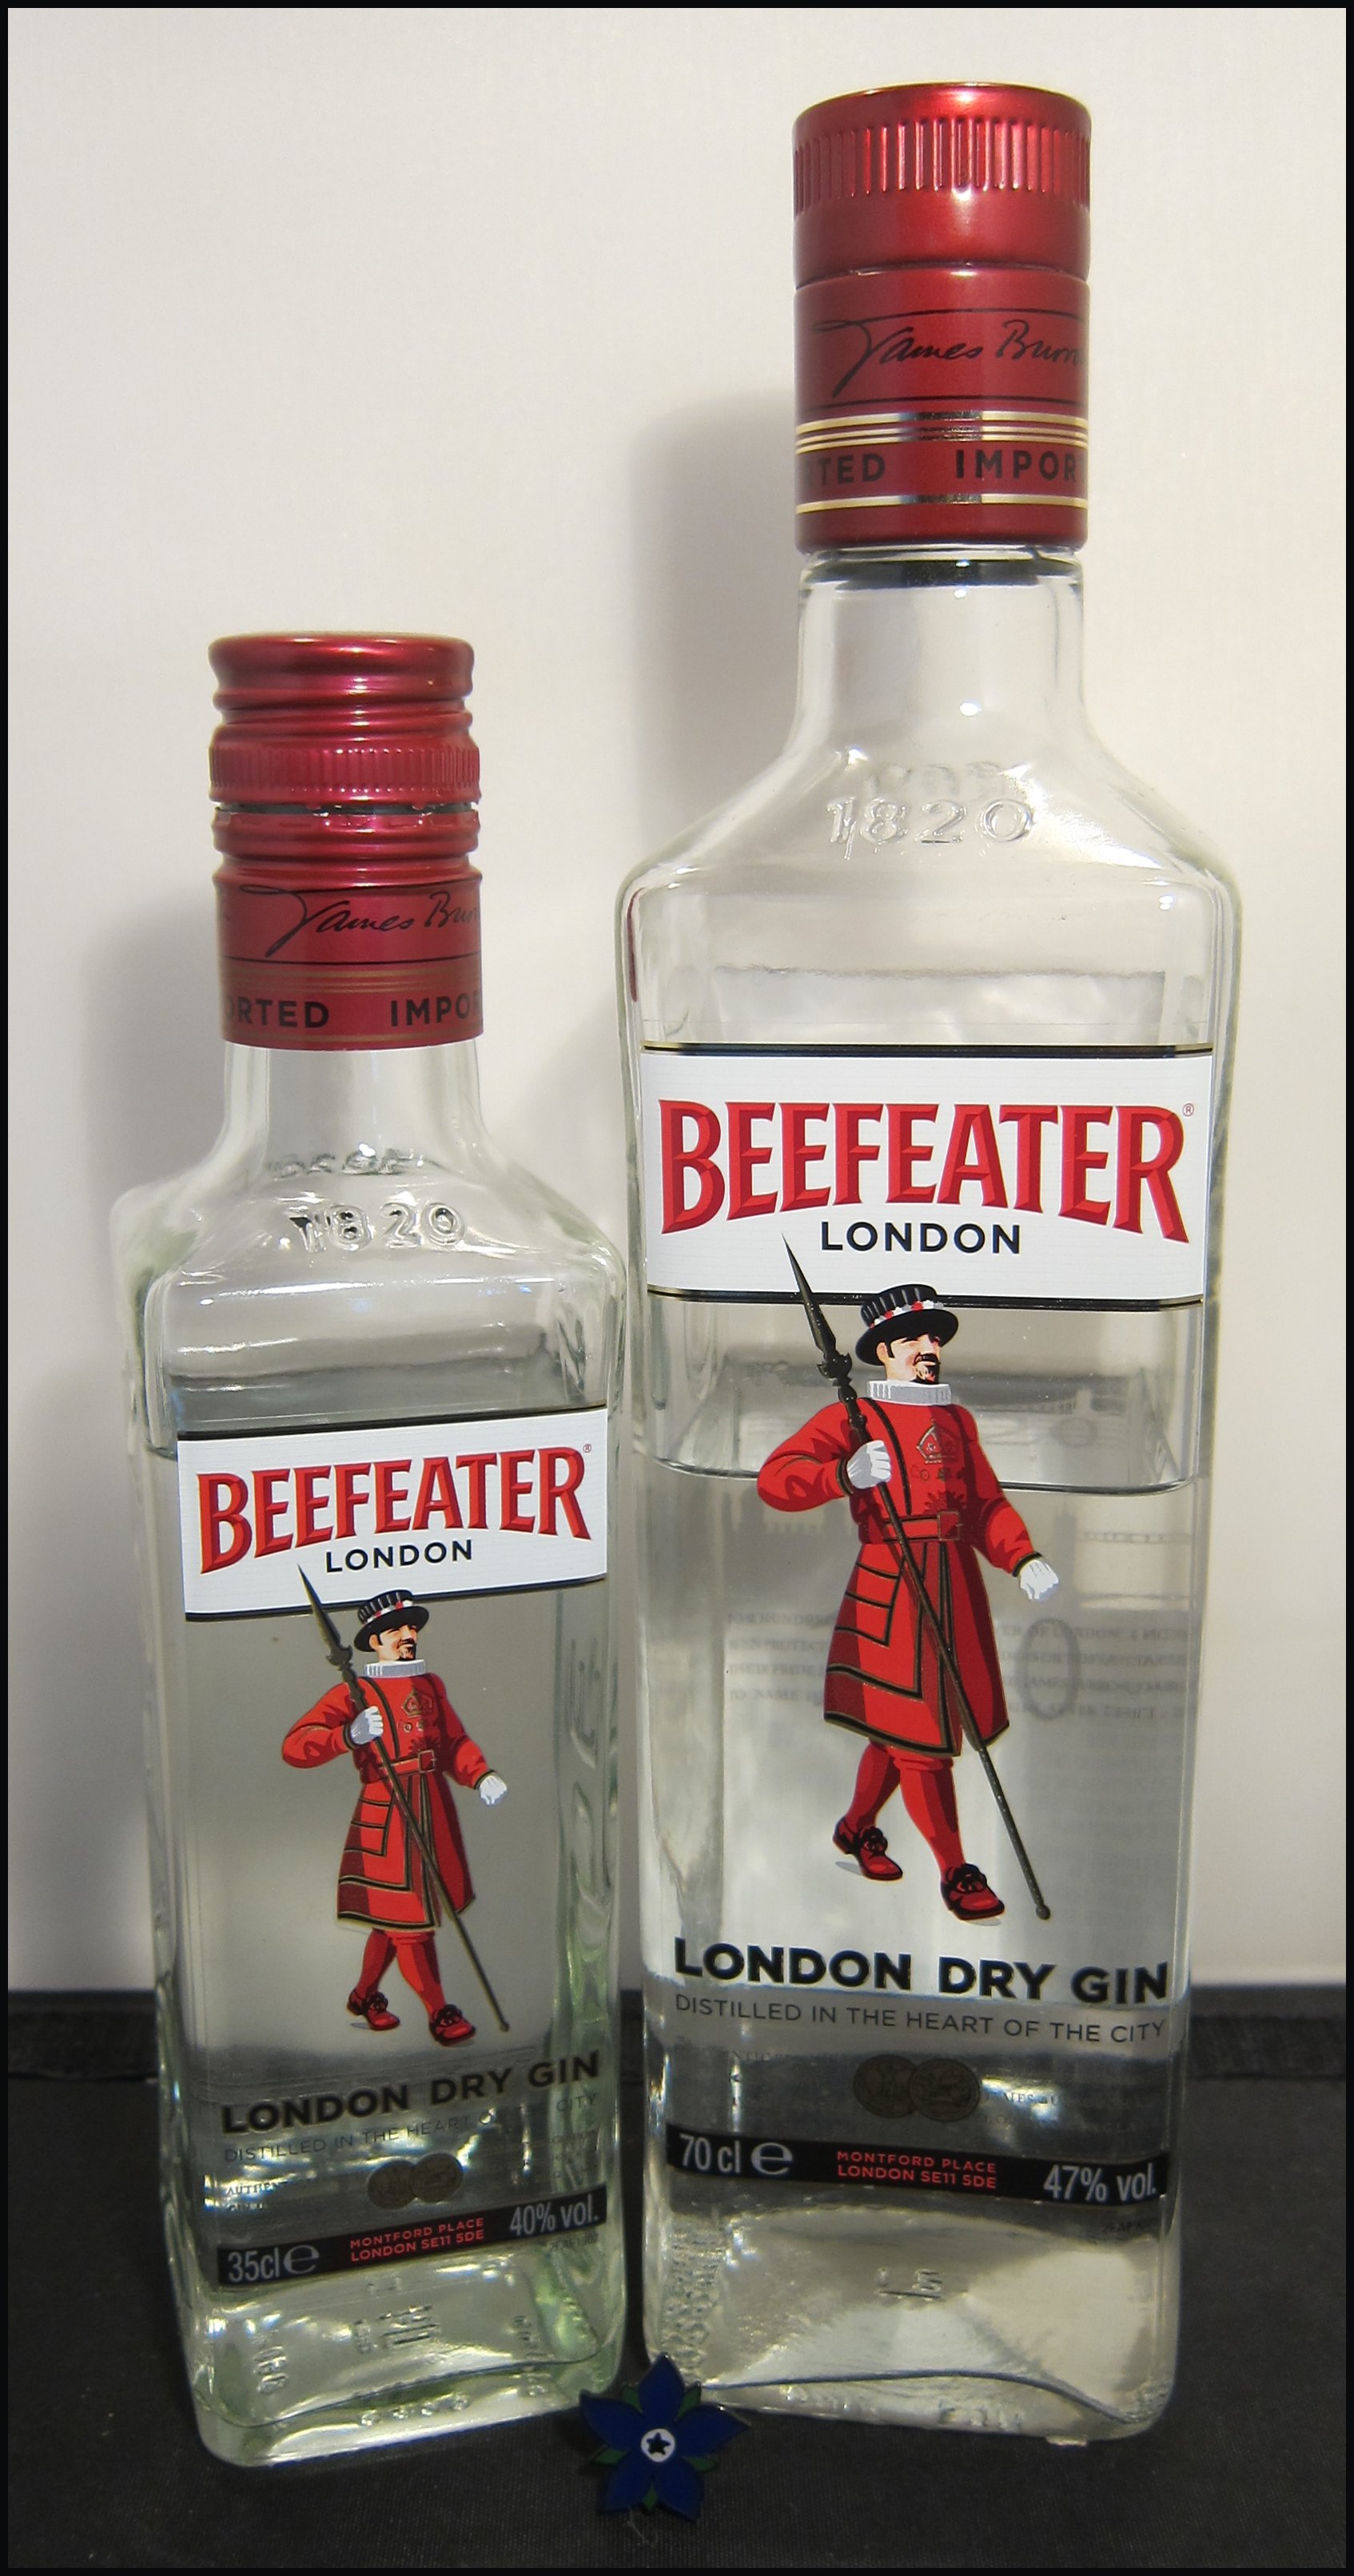 Cocktails with… Beefeater London Gin Garden | Fruit Cup Summer Bonus Beefeater – Gin! With